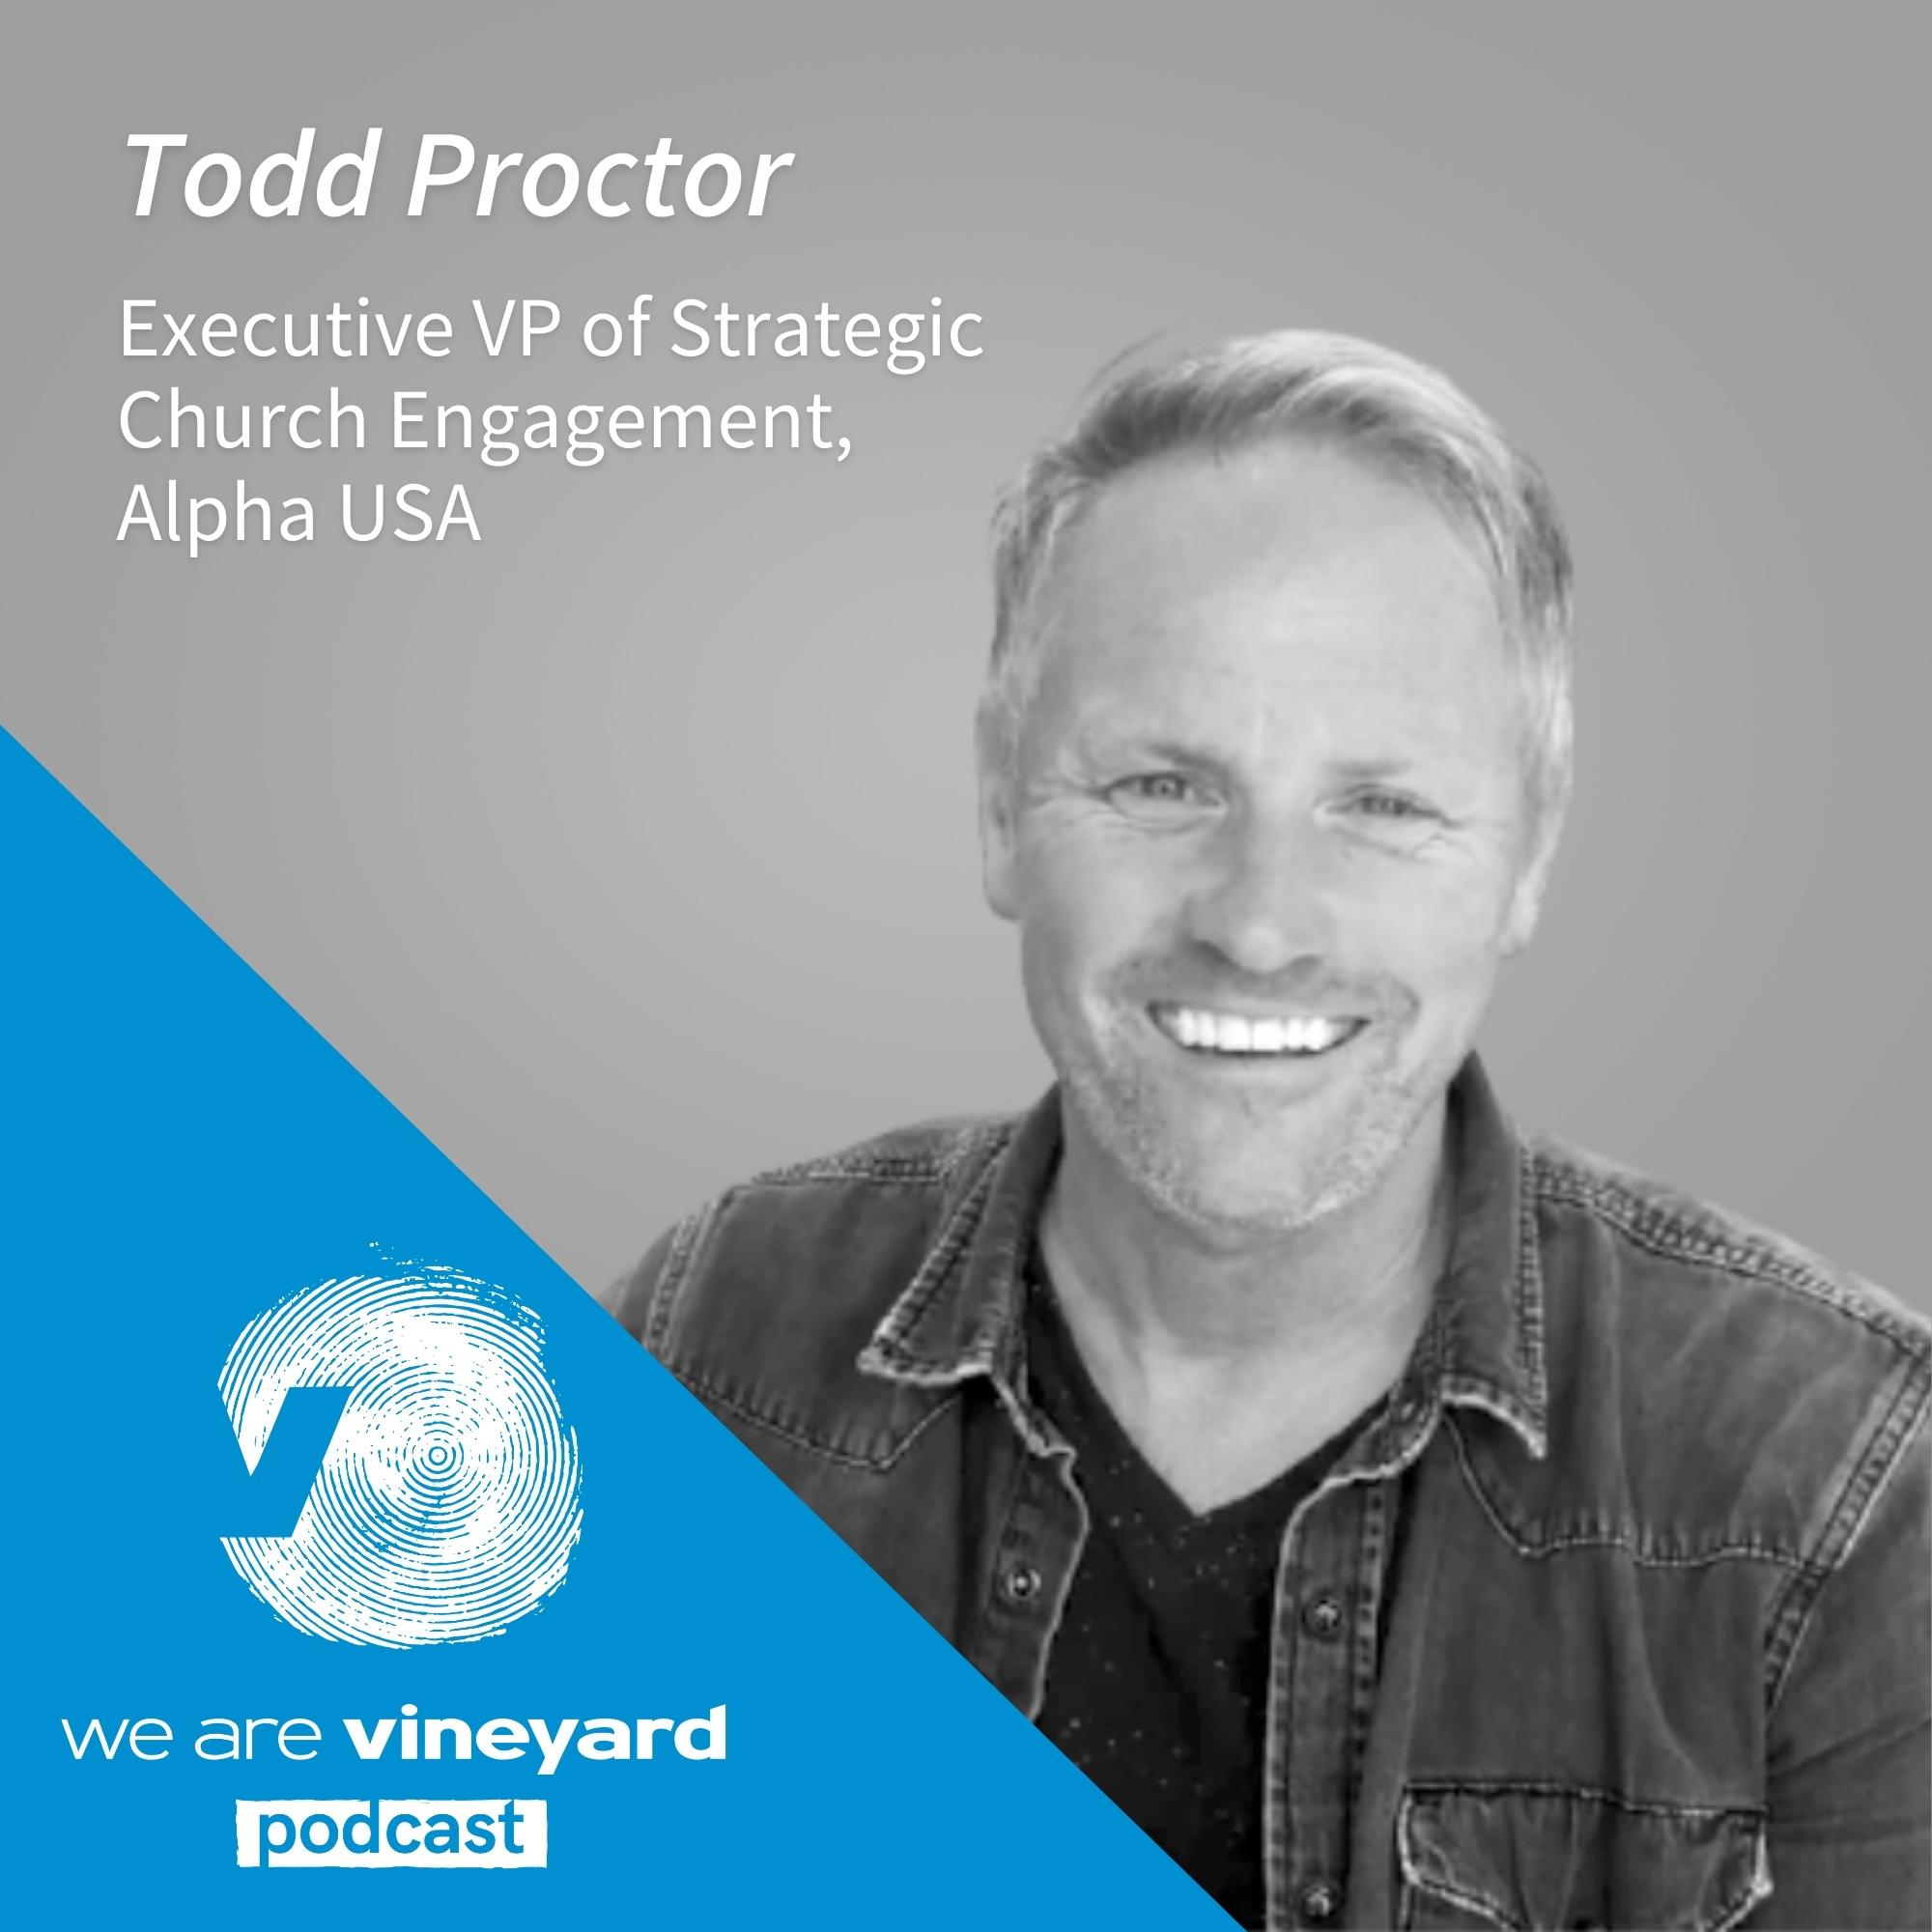 Todd Proctor: Going At The Pace Of People And Bringing Them With You